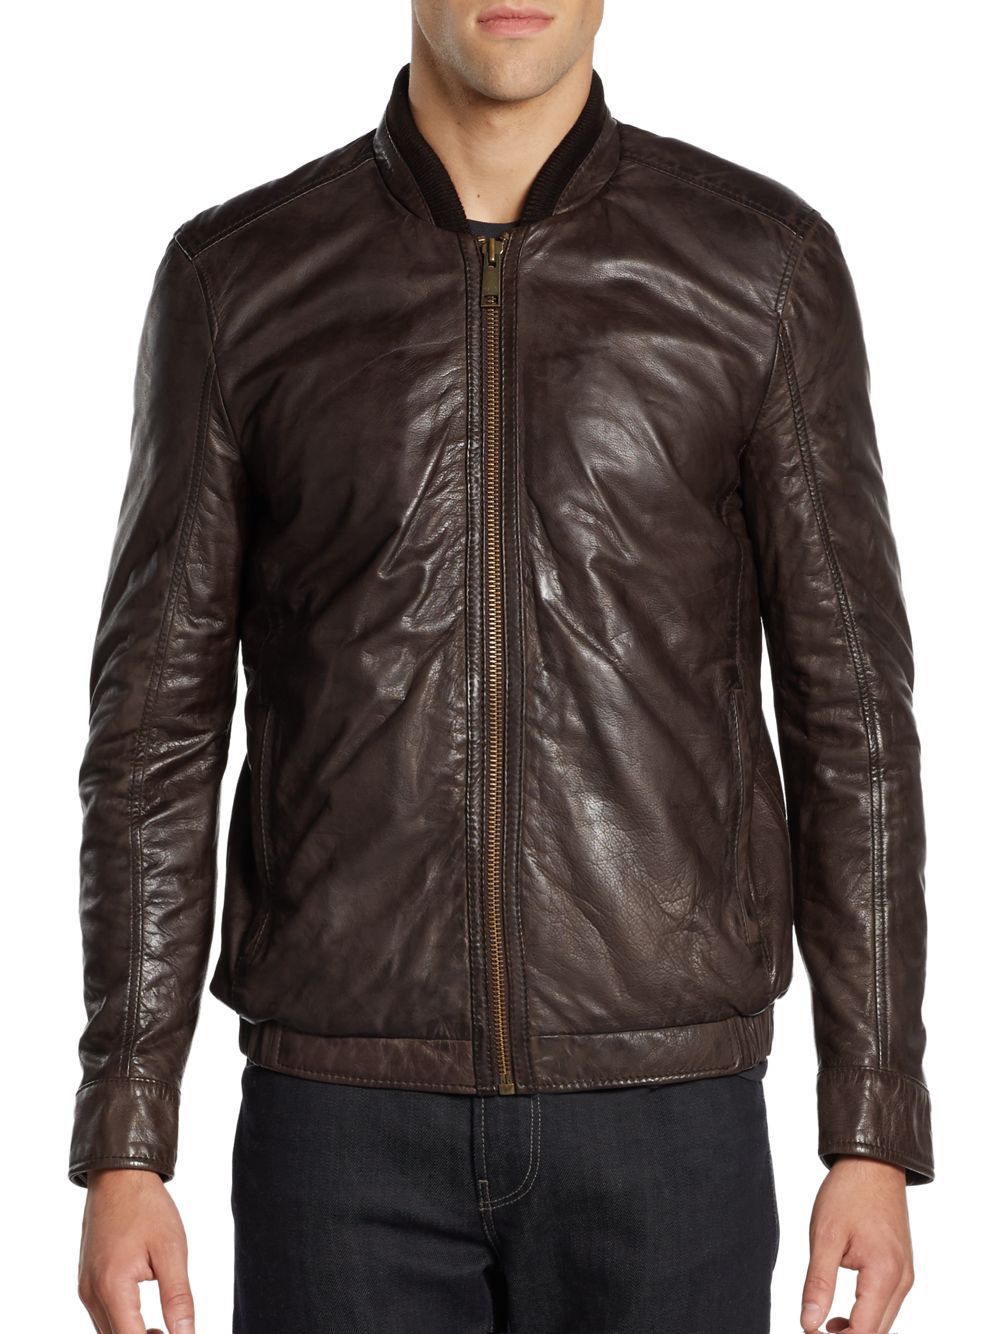 Lyst - Marc New York Cash Leather Bomber Jacket in Brown for Men